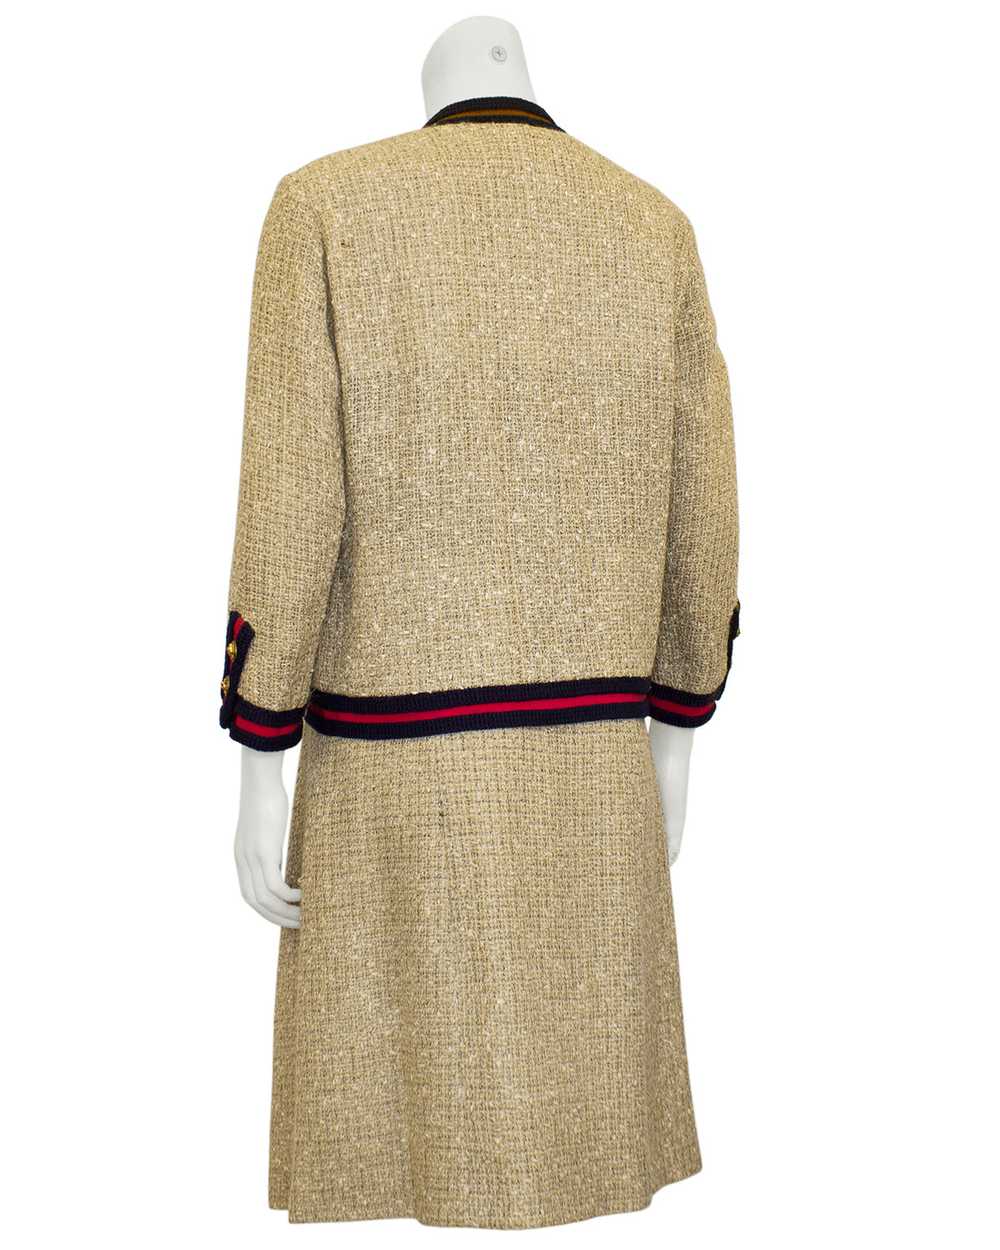 Chanel Couture 1961 Iconic Skirt Suit - image 2